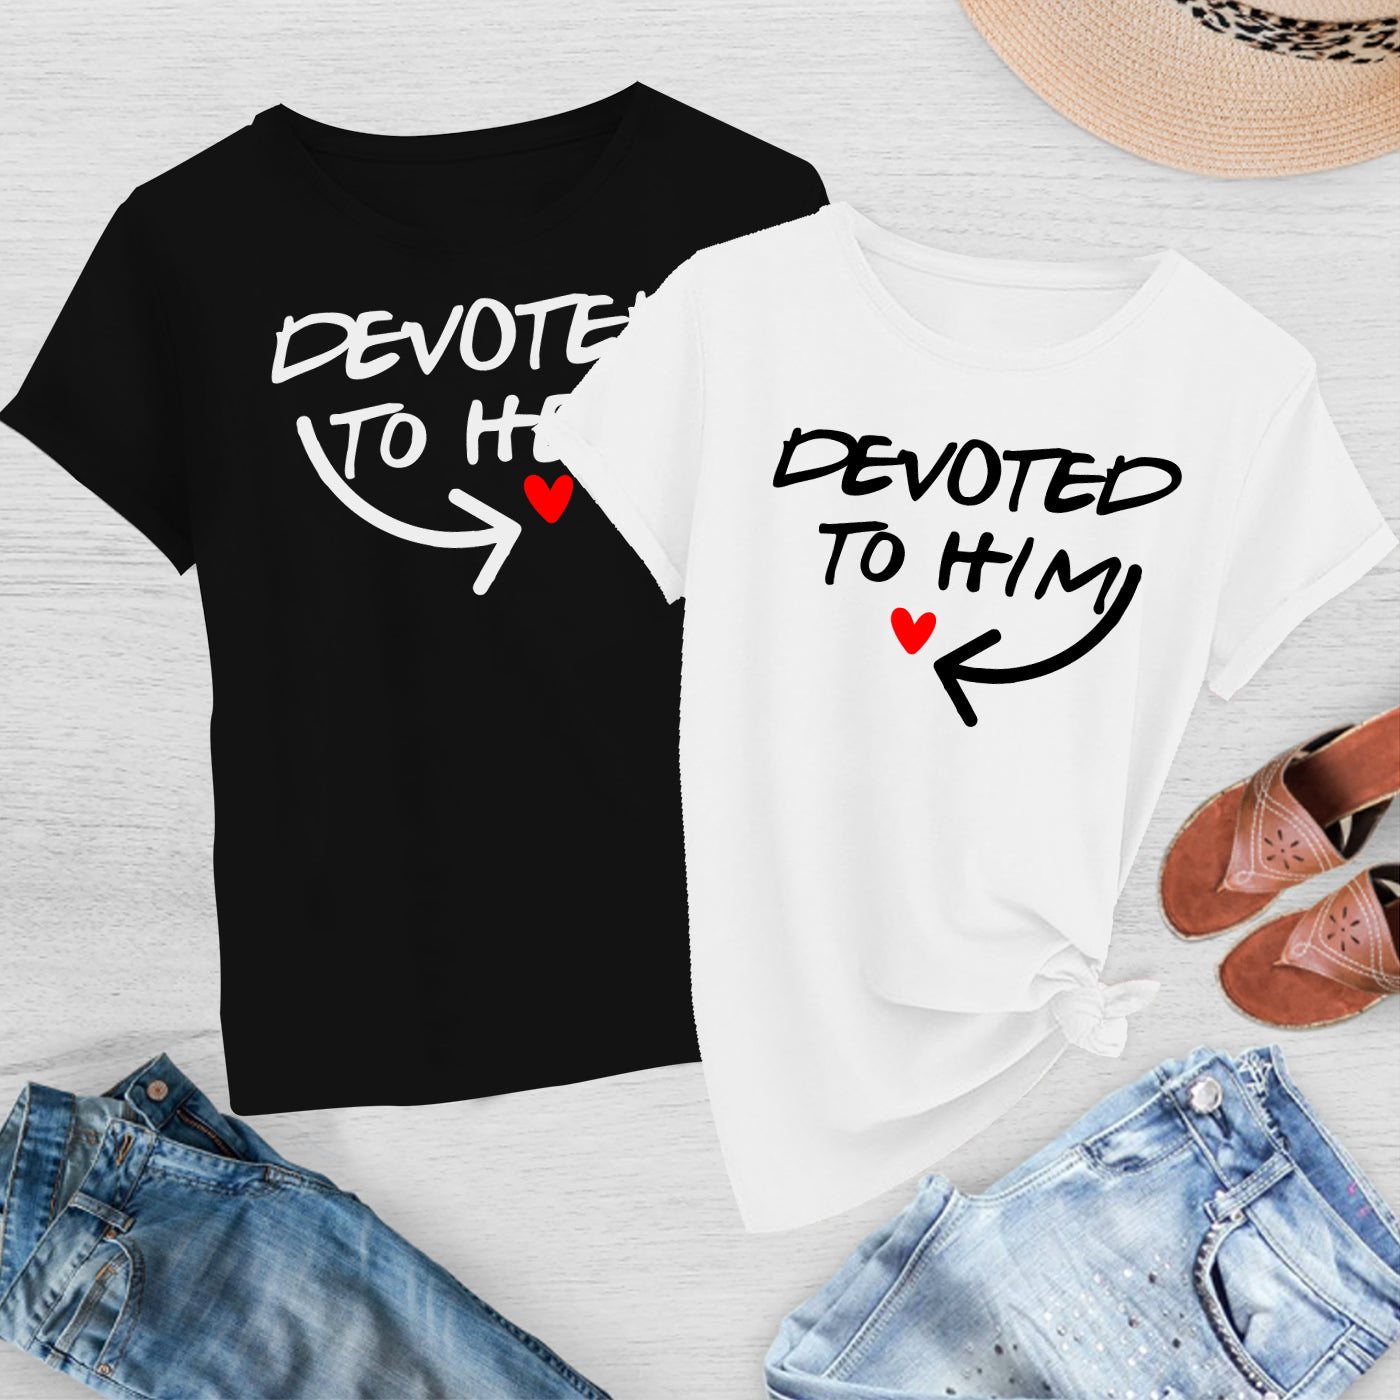 Devoted To Her - Devoted To Him Tees